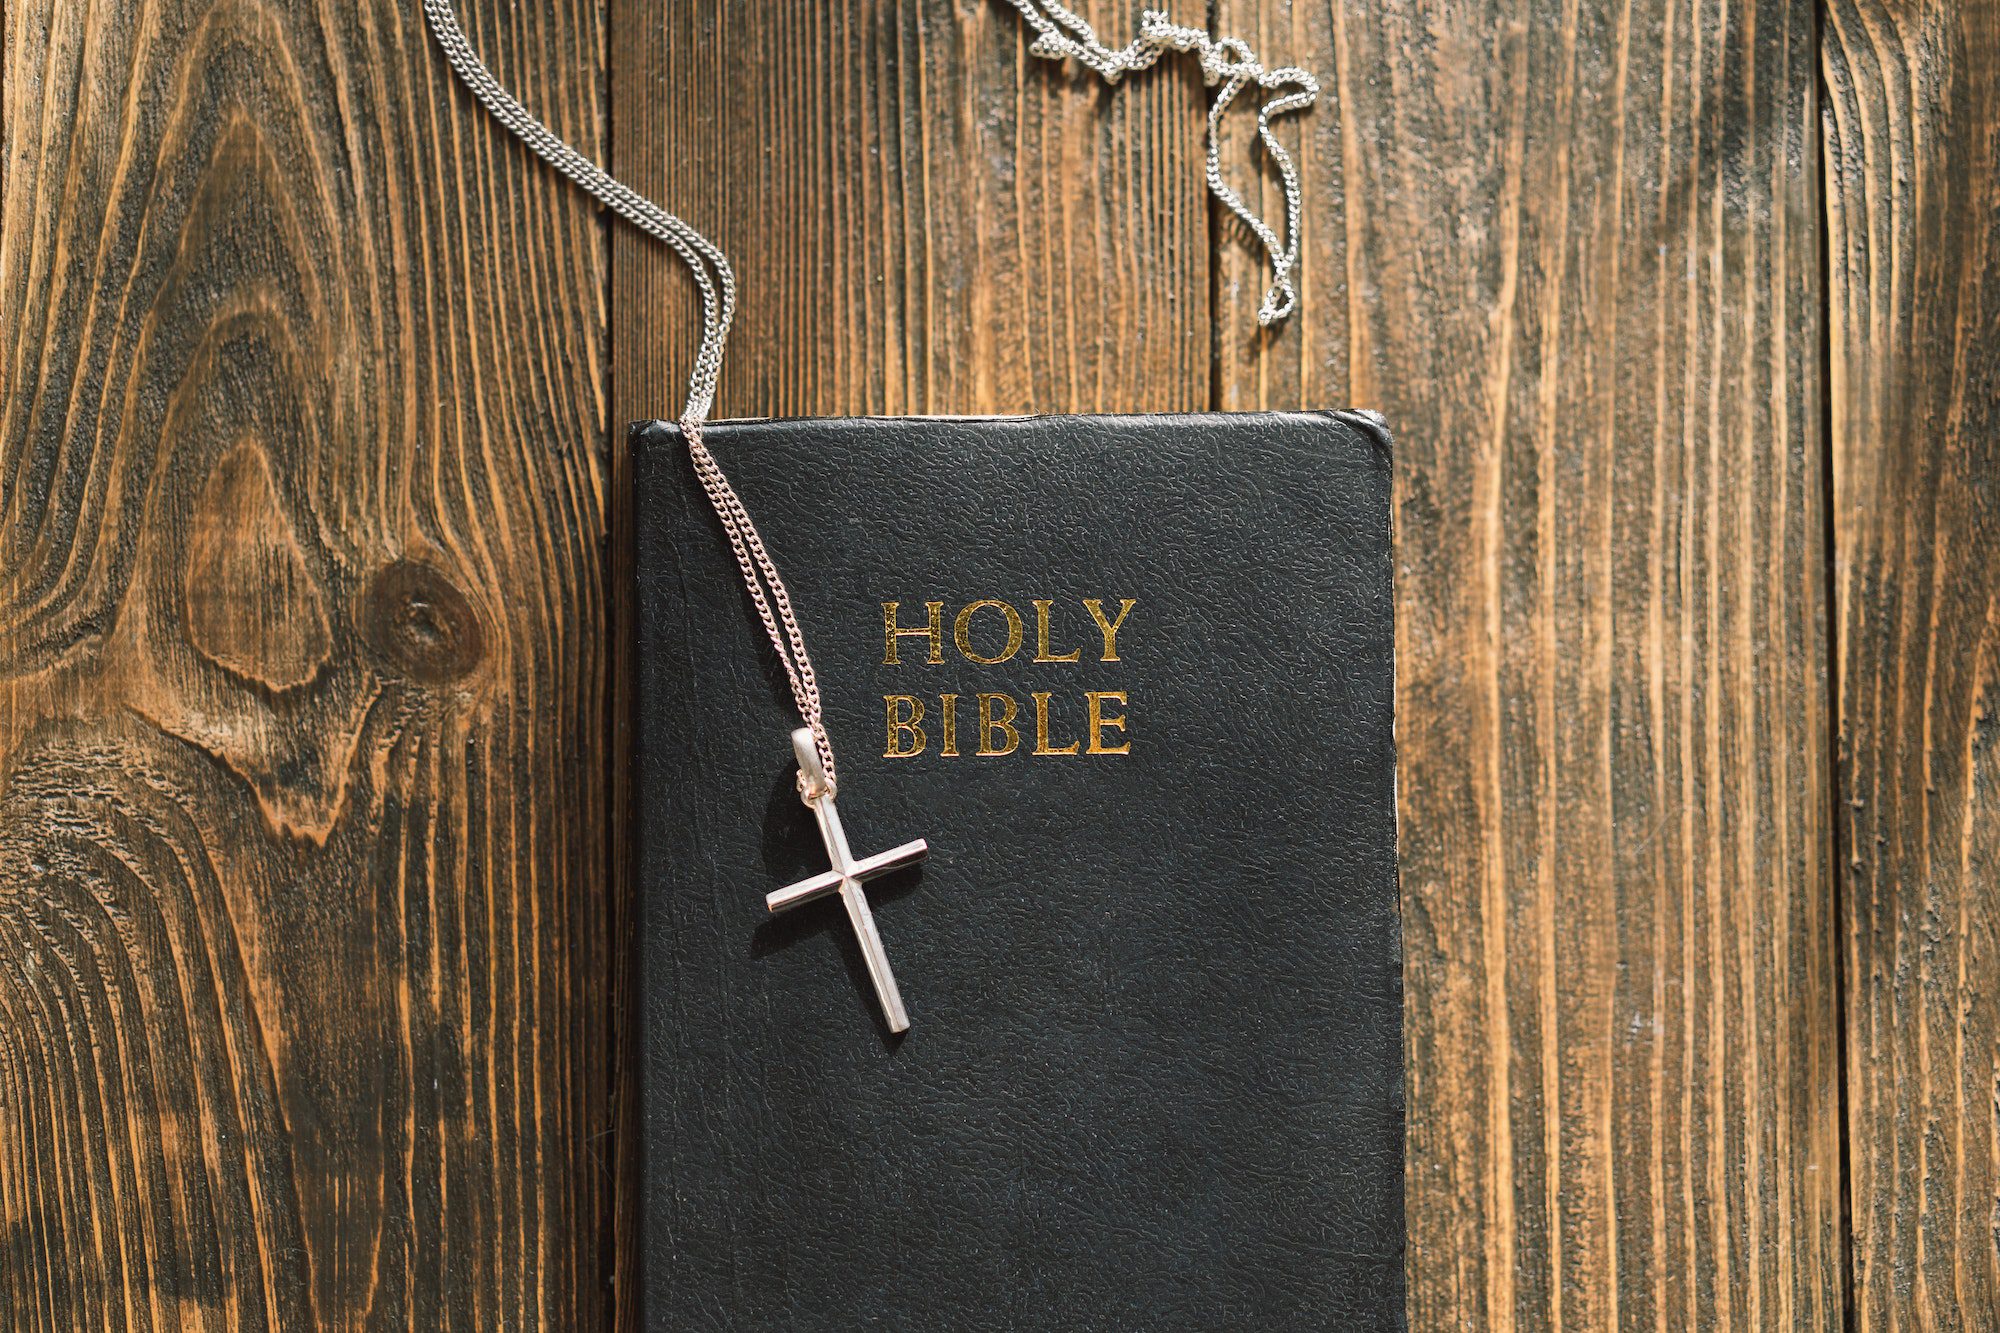 Bible and cross on a wood background. Study Bible worship concept.